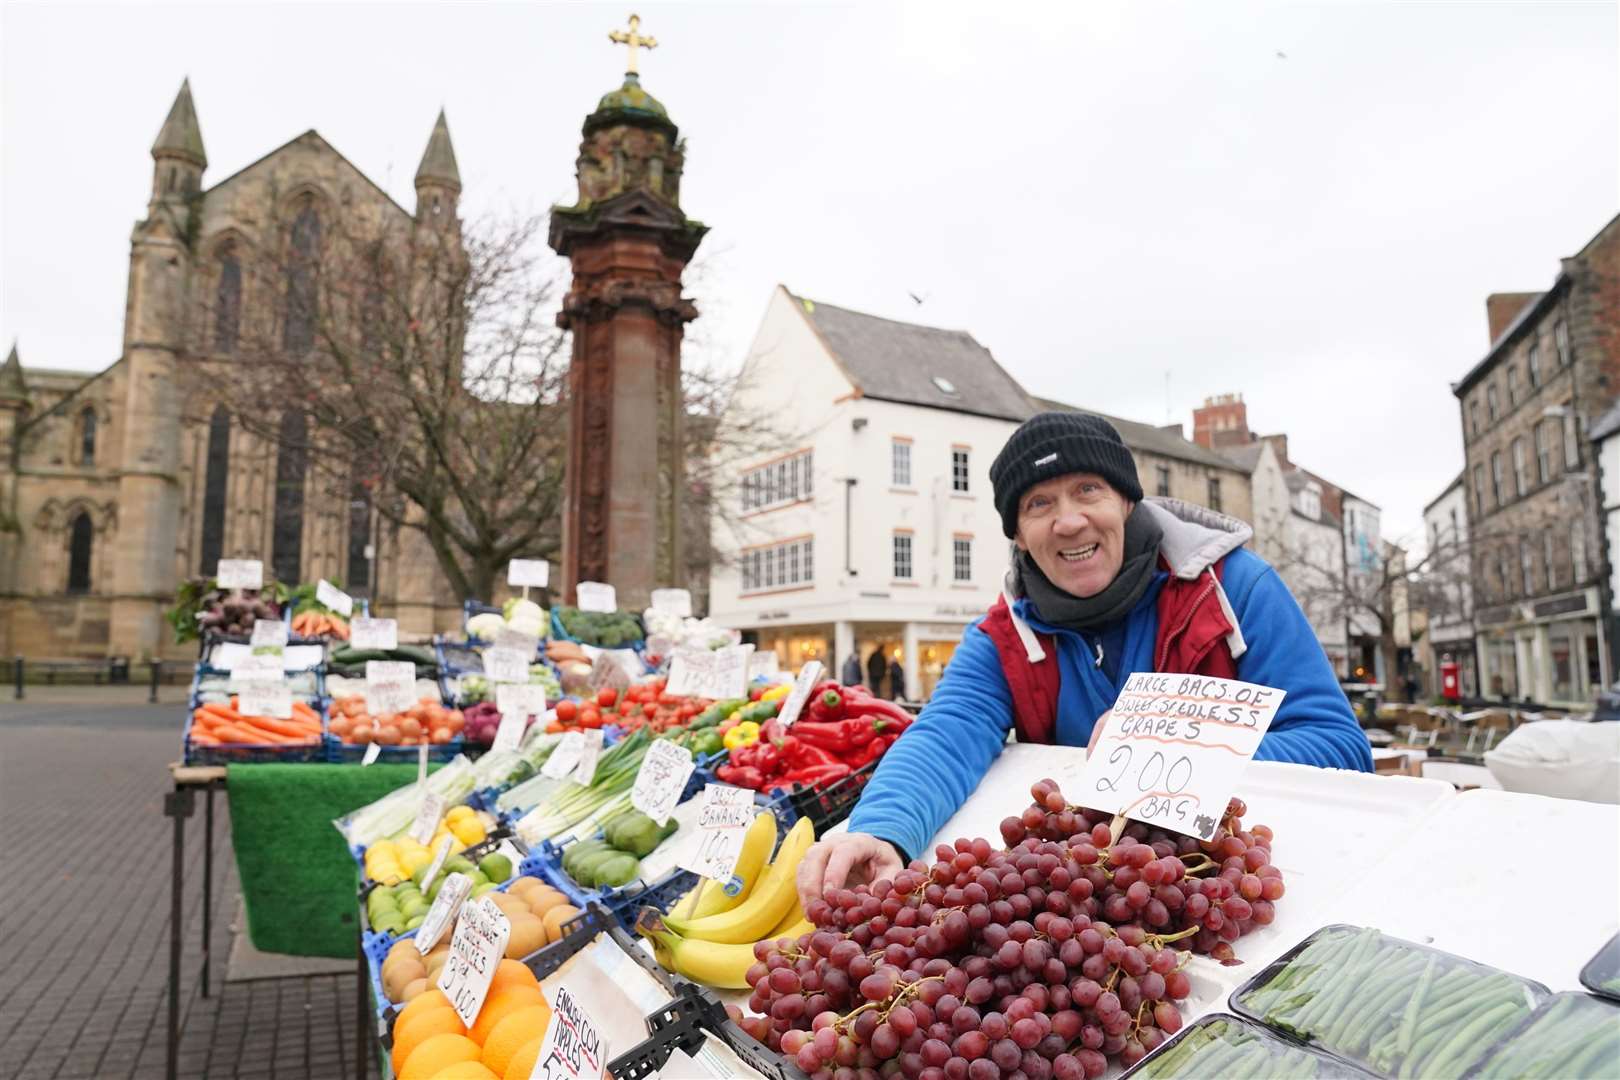 Fruit and vegetable seller Billy Atkinson, 59, outside the abbey in Hexham (Owen Humphreys/PA)